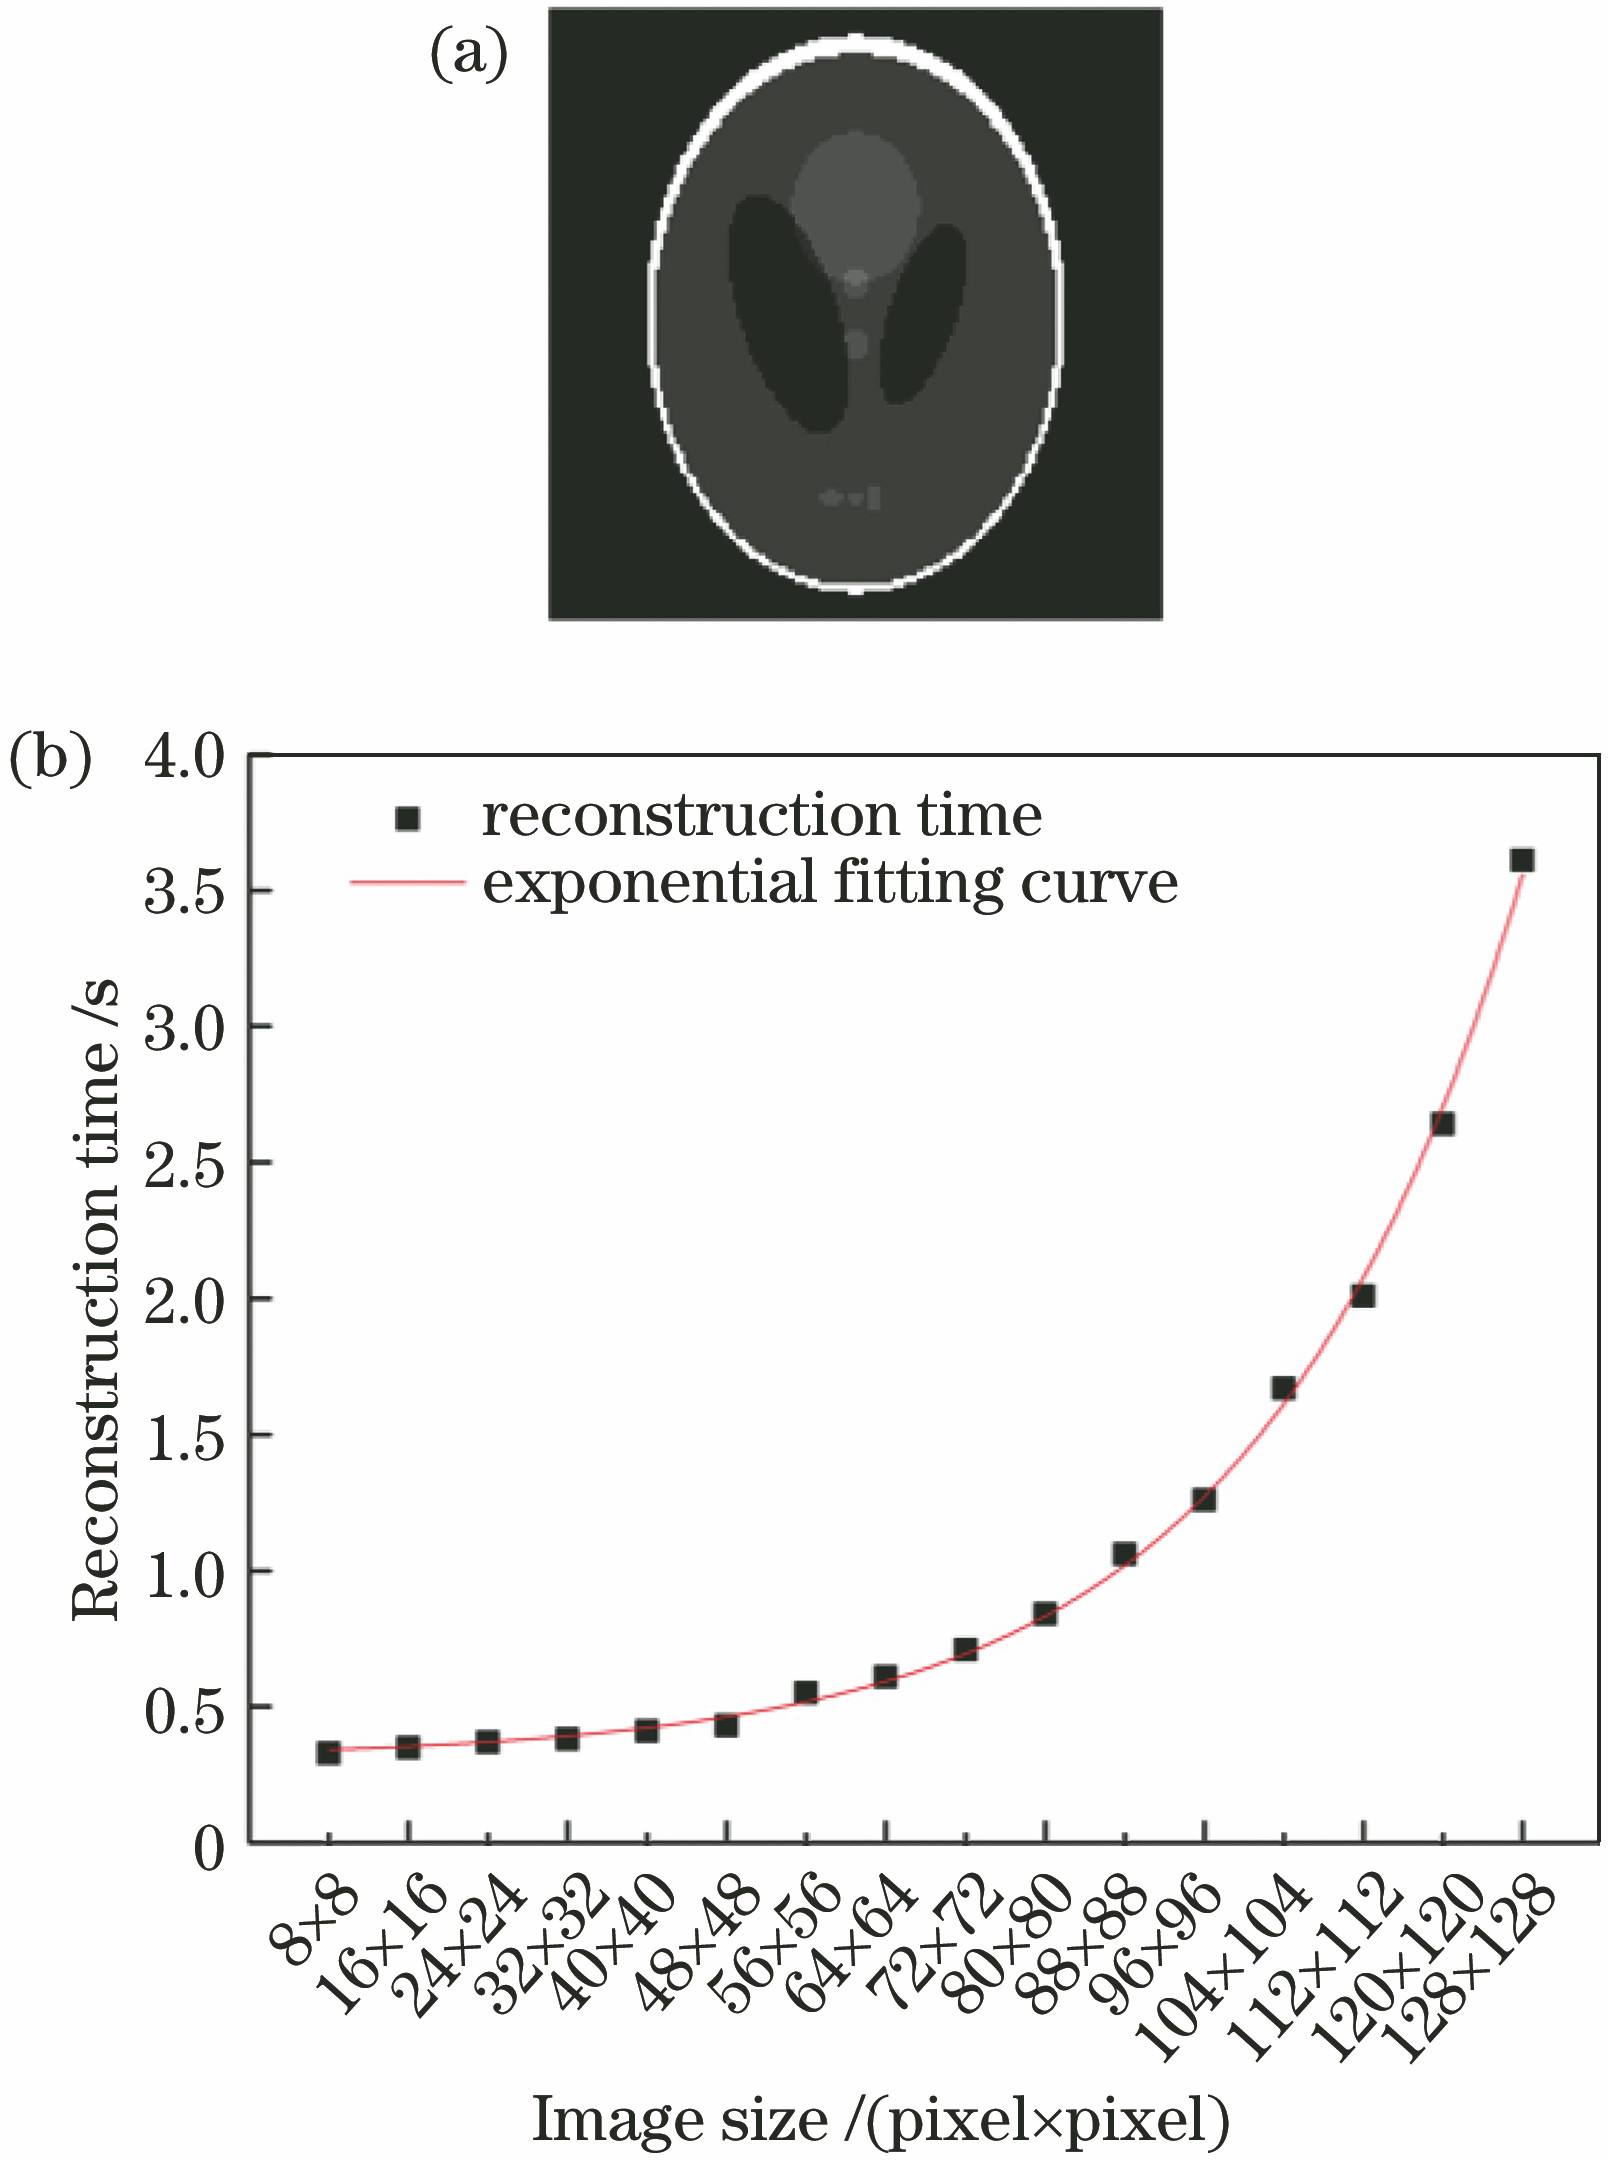 Simulation of reconstruction of compressive sensing images. (a) Original image of phantom; (b) reconstruction time of phantom based on TVAL3 algorithm at different resolutions